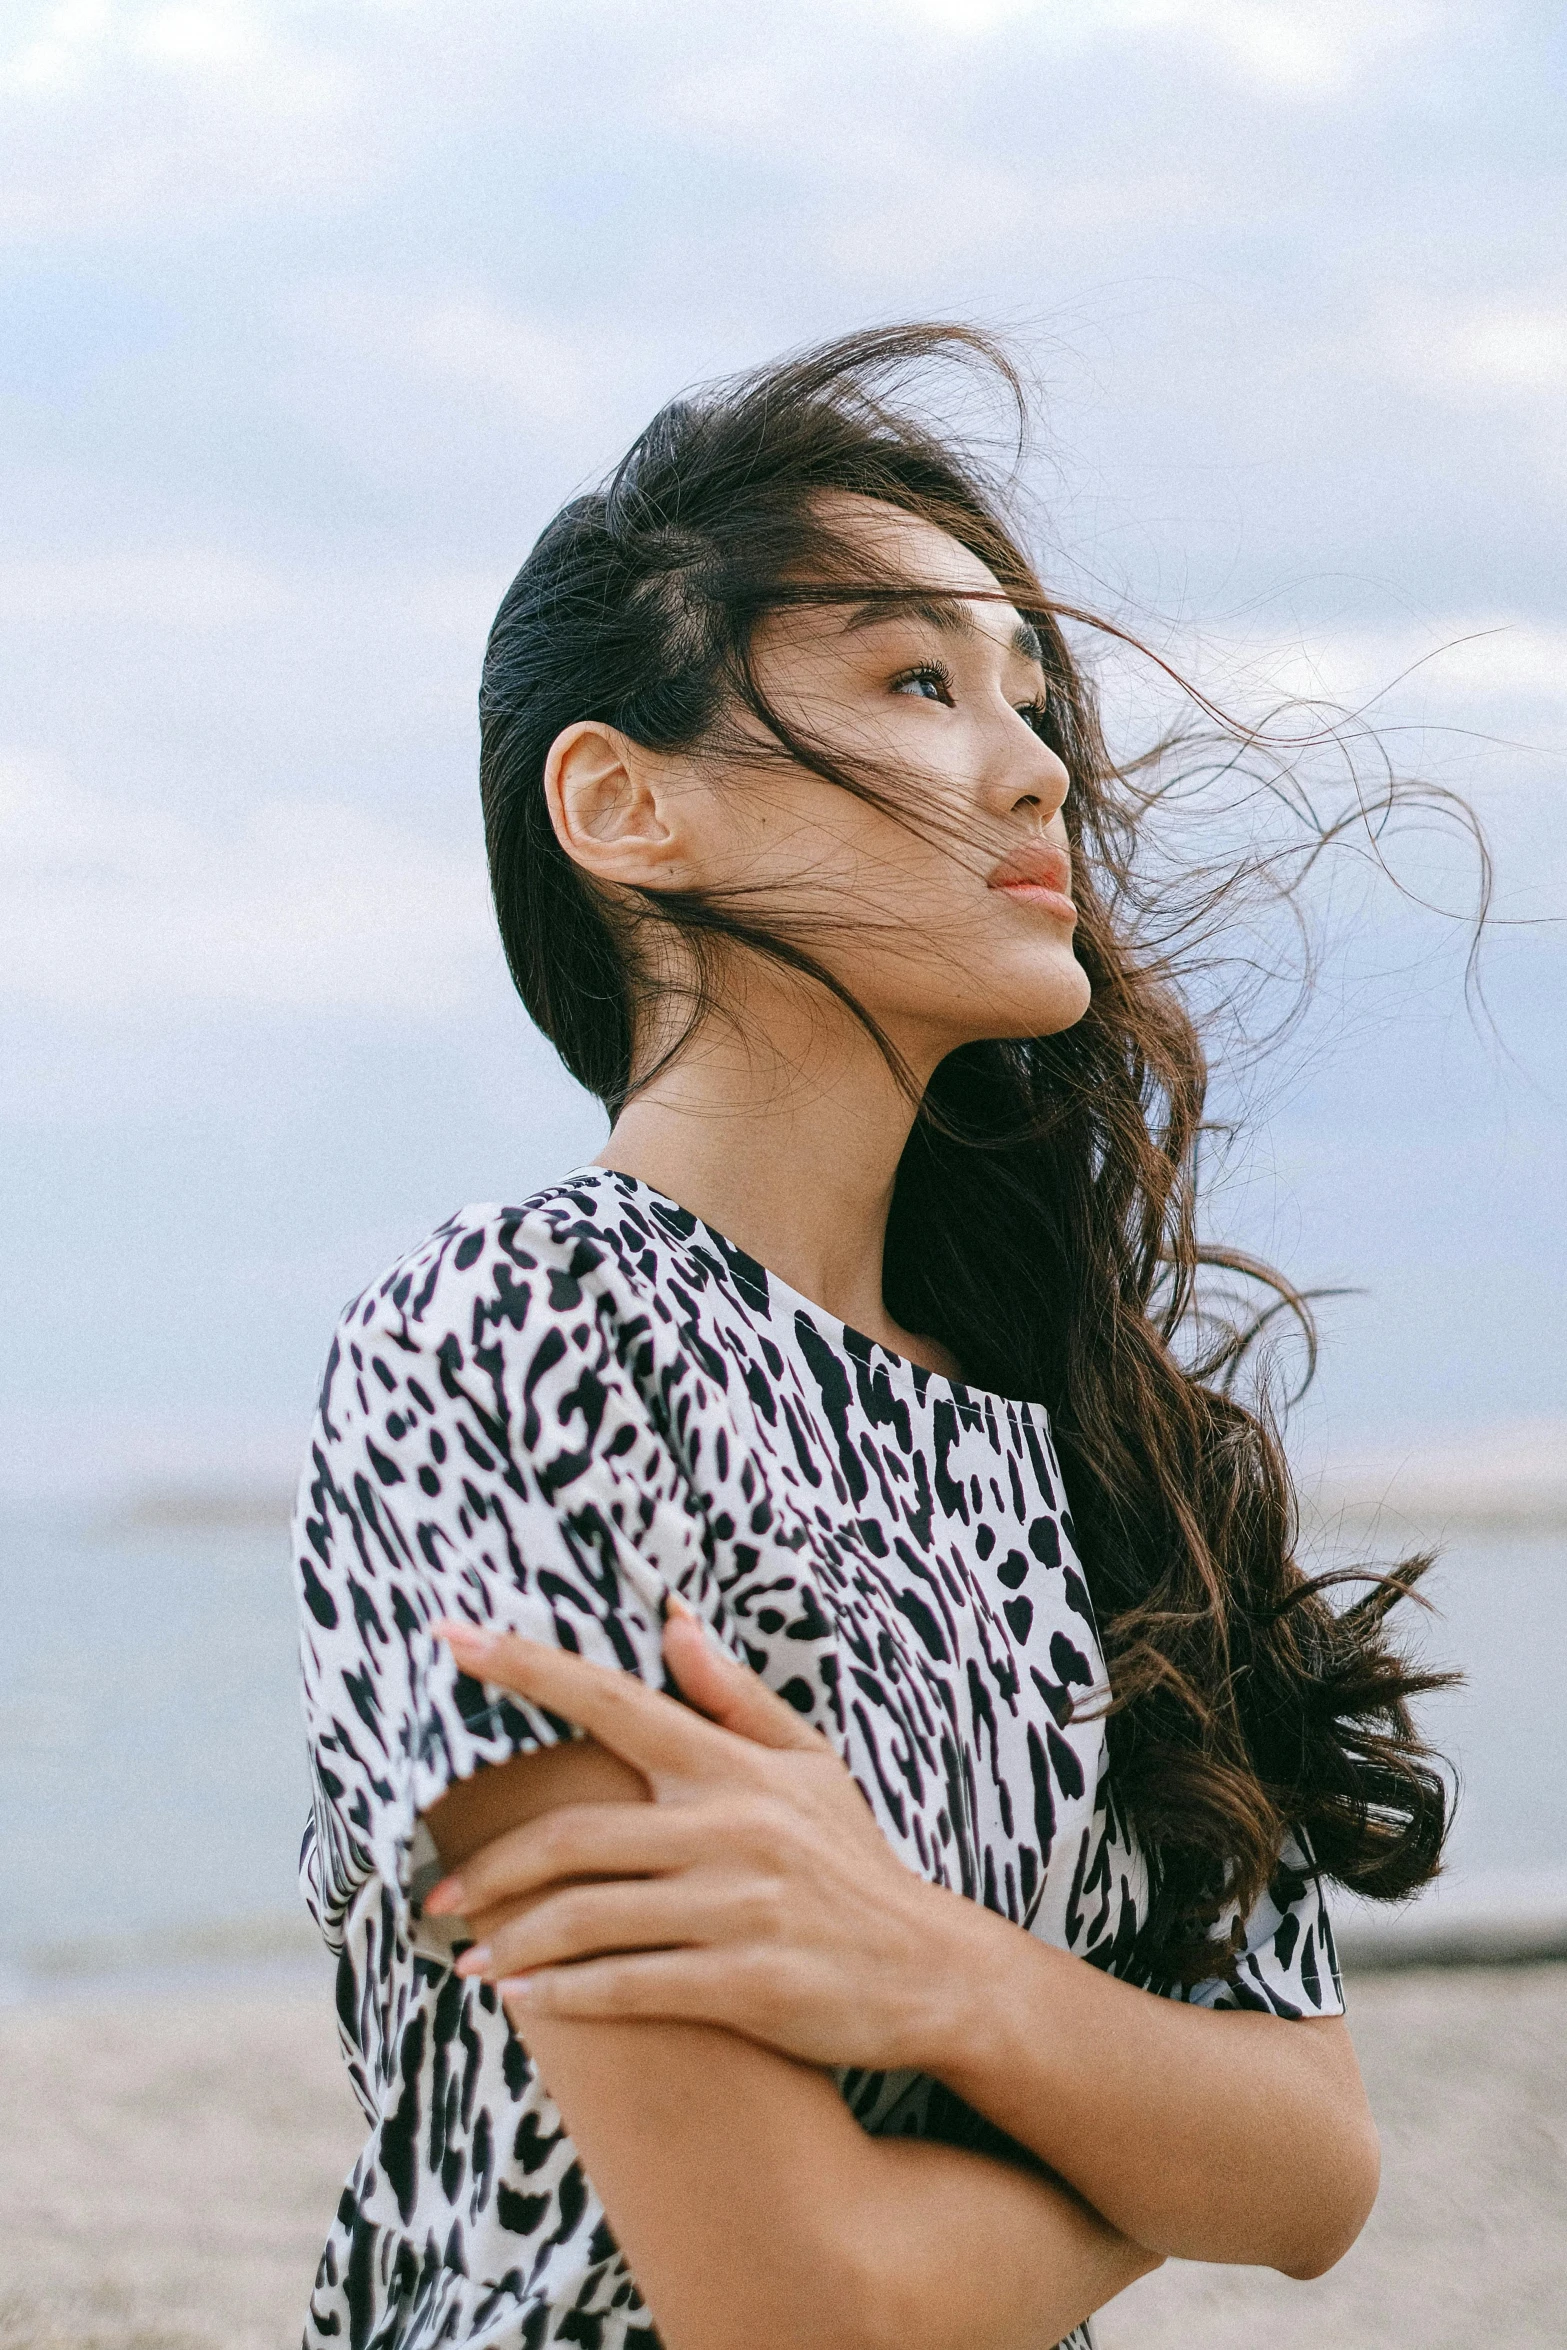 a woman standing on a beach next to the ocean, an album cover, inspired by Zheng Xie, trending on pexels, long windy hair style, patterned clothing, beautiful young asian woman, hands in her hair. side-view